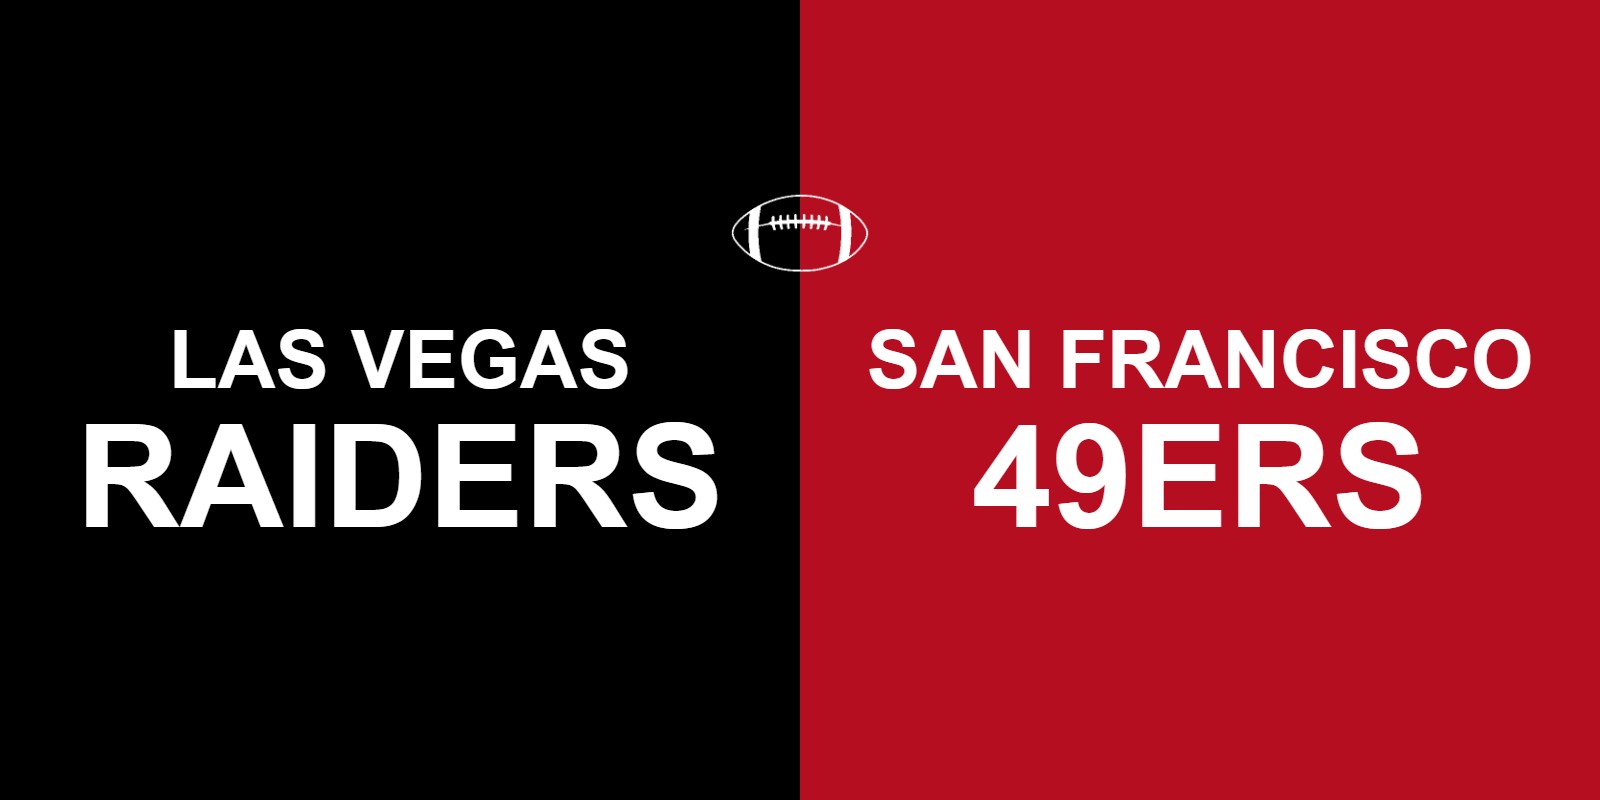 49ers and raiders tickets